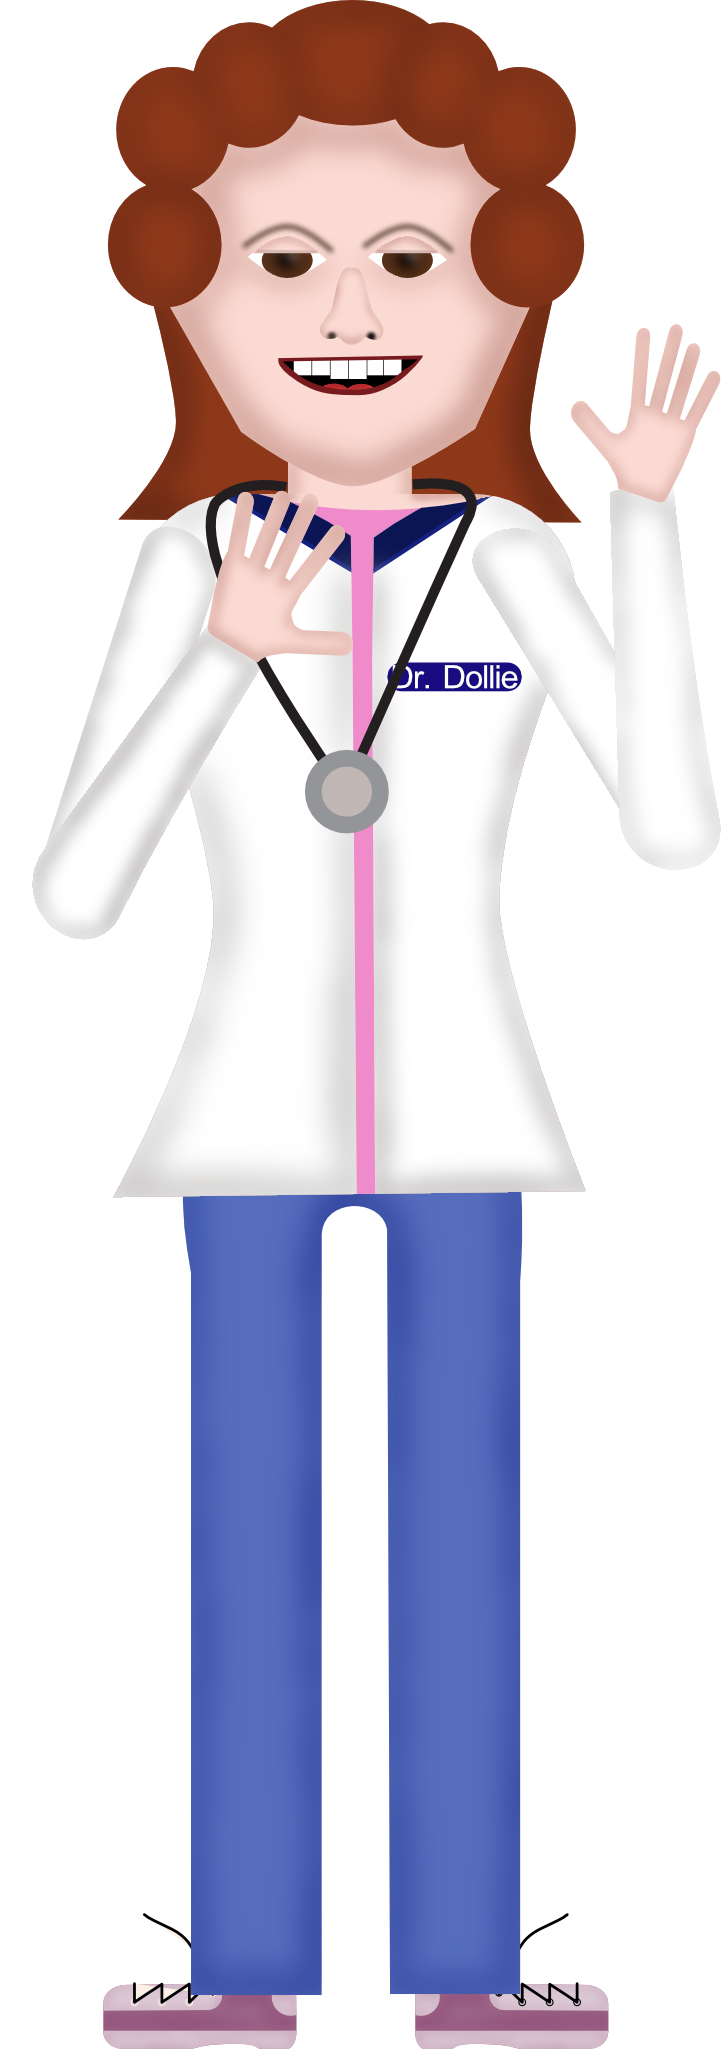 Dollie the Doctor – Character Insight